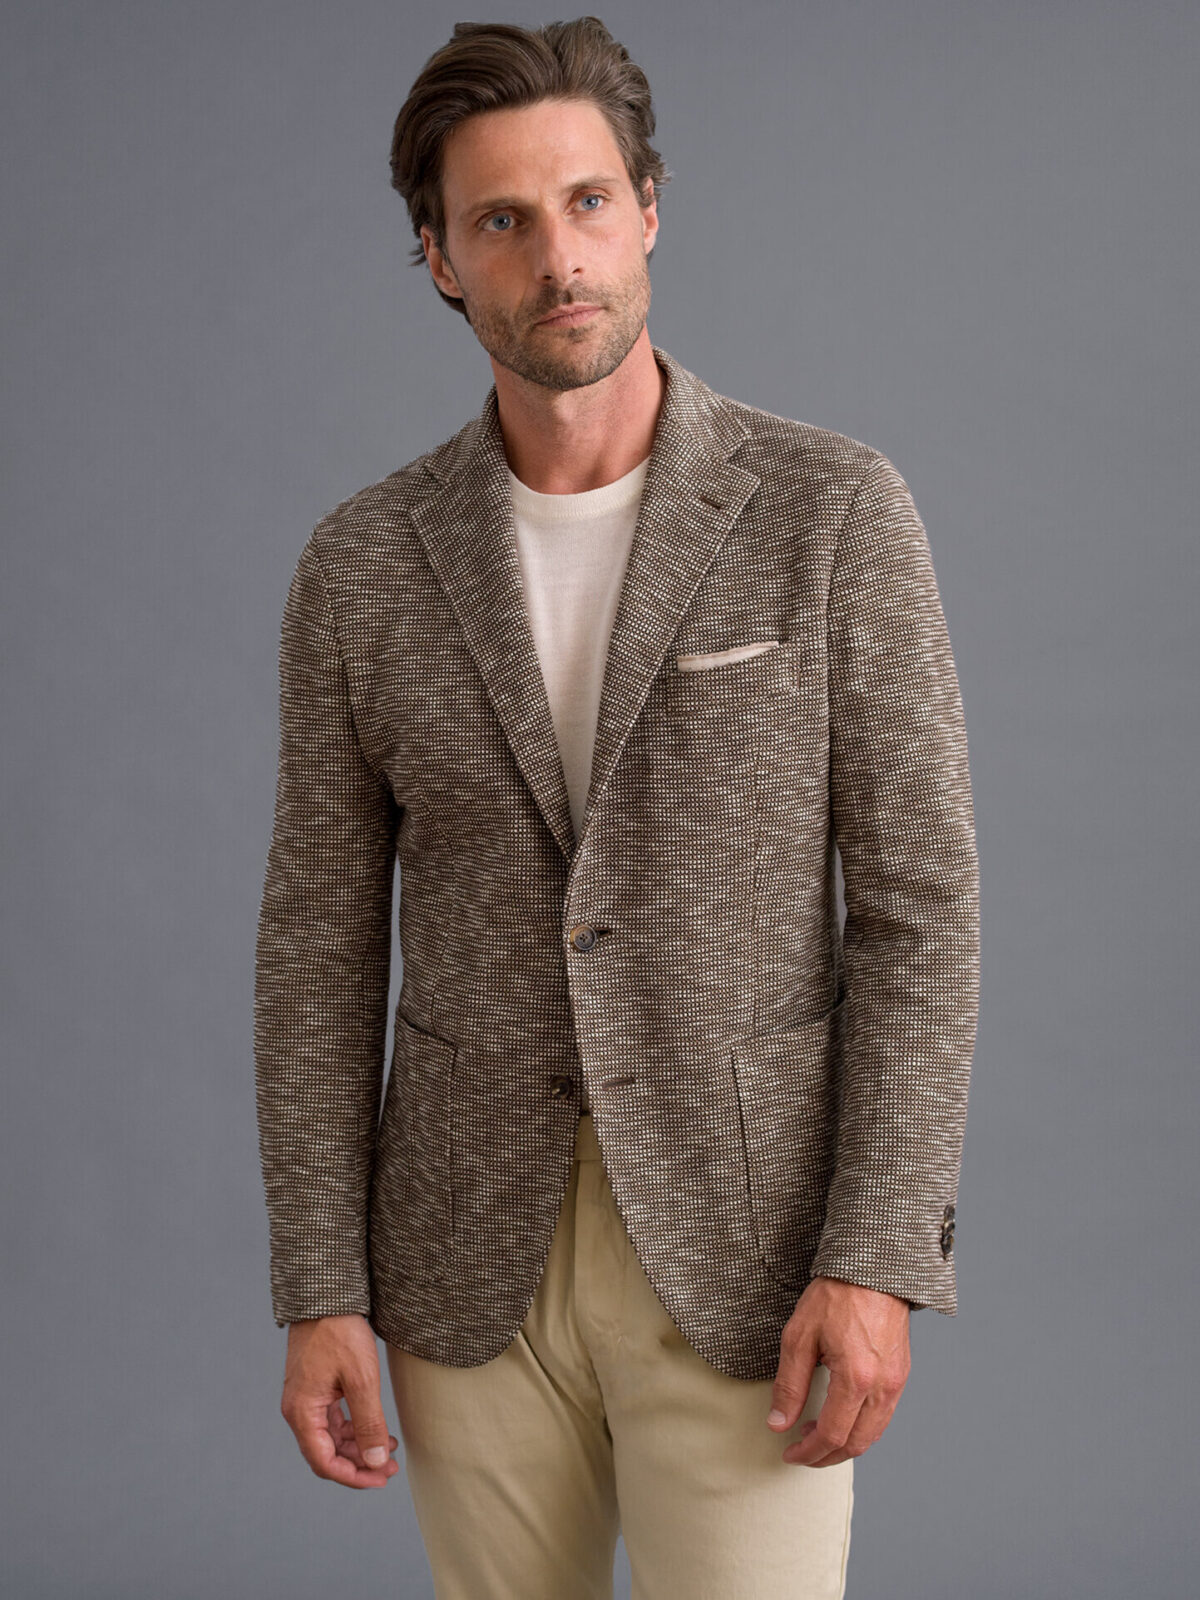 Navy Wool and Linen Waverly Jacket - Custom Fit Tailored Clothing